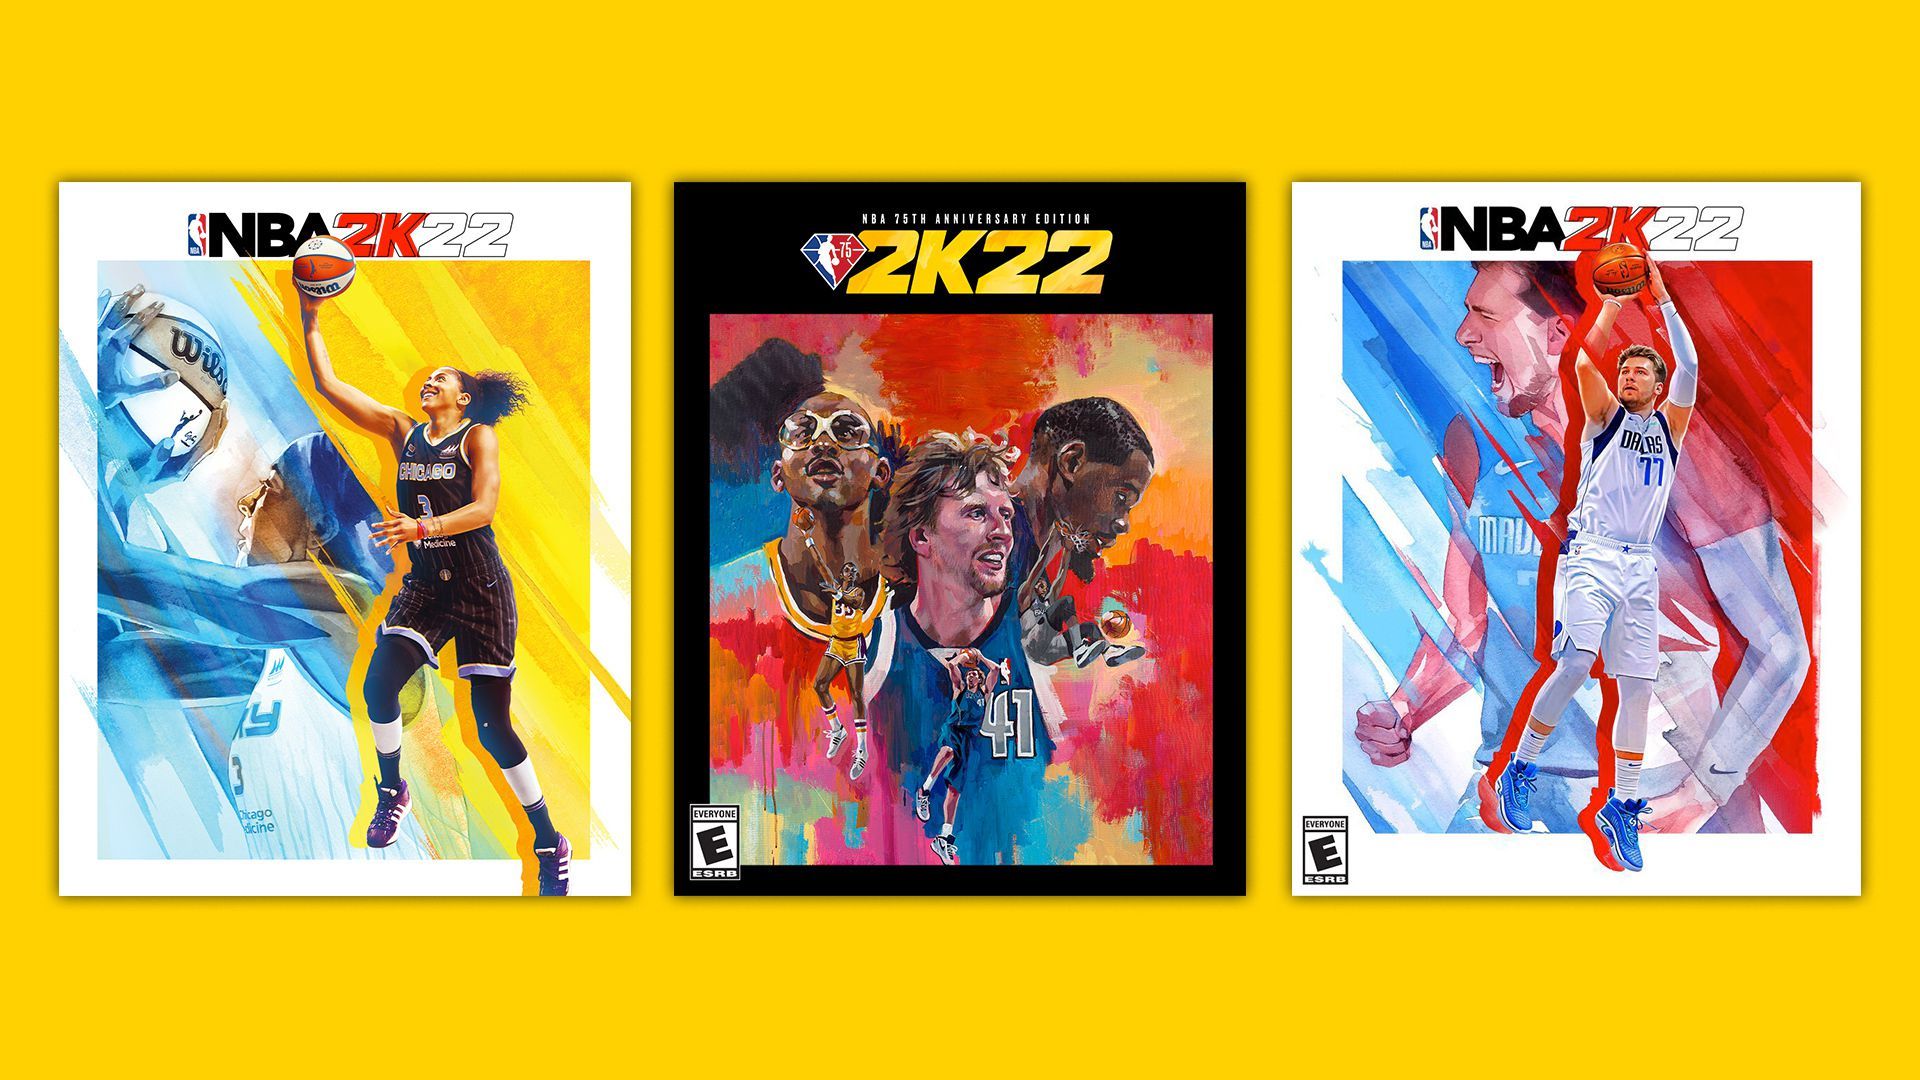 Picture of the NBA 2K22 video game covers